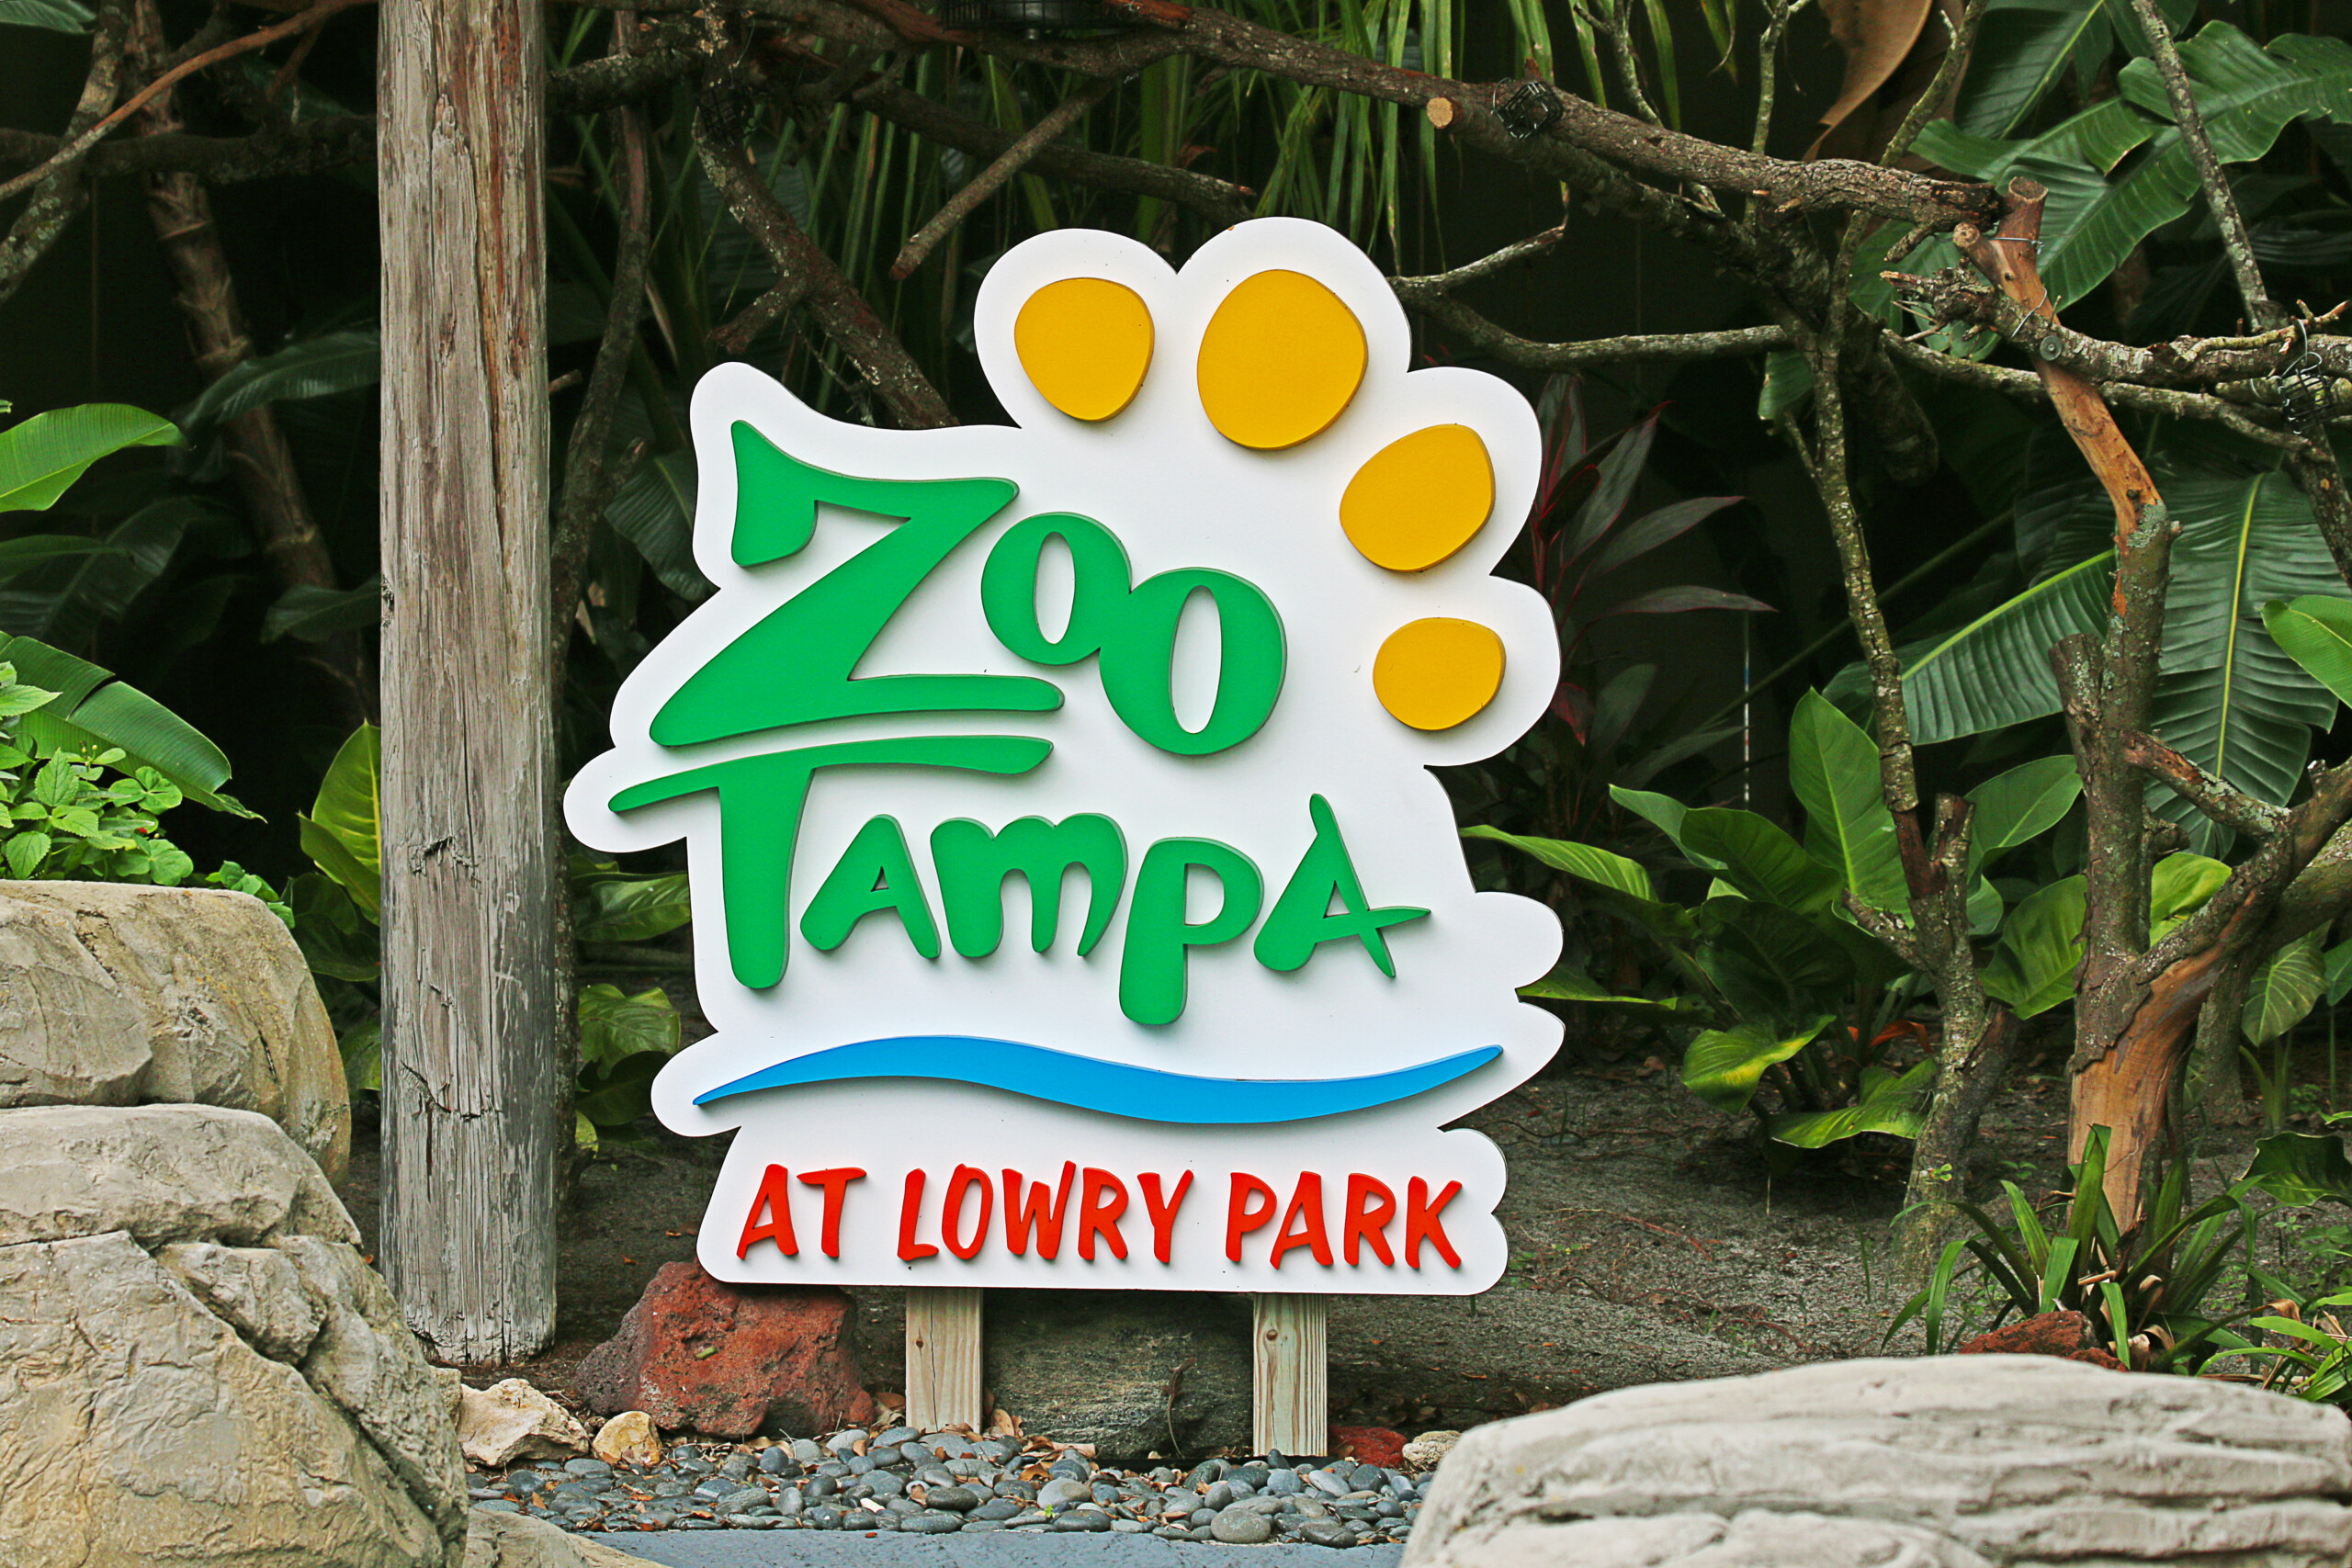 Zoo Tampa at Lowry Park